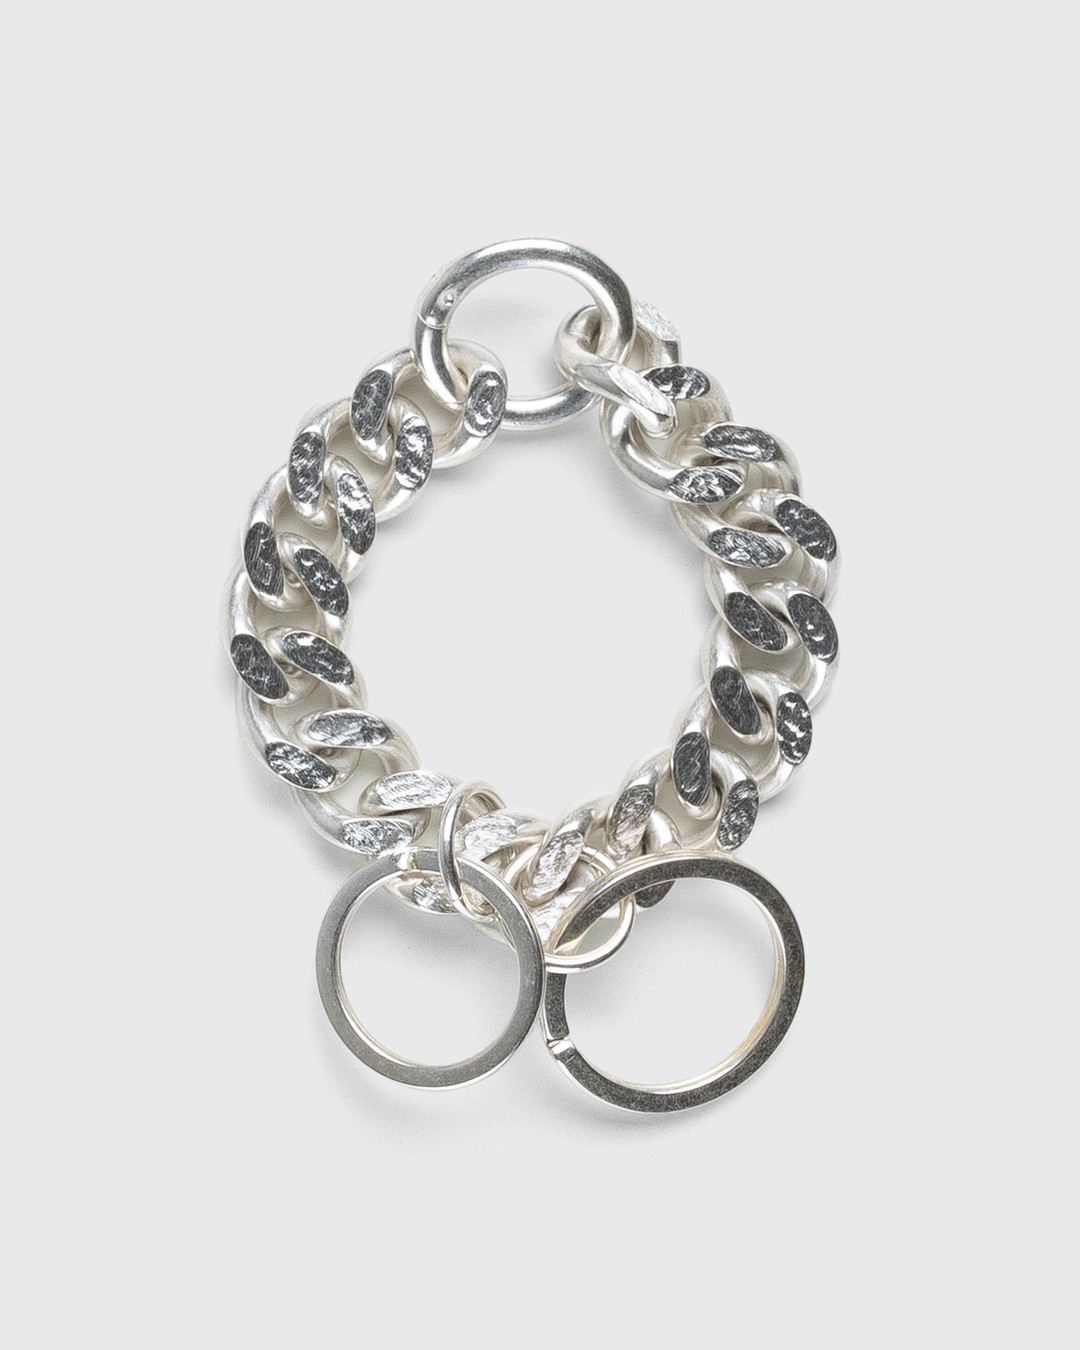 Jil Sander – Chain Link Key Ring Silver - Keychains - Silver - Image 1